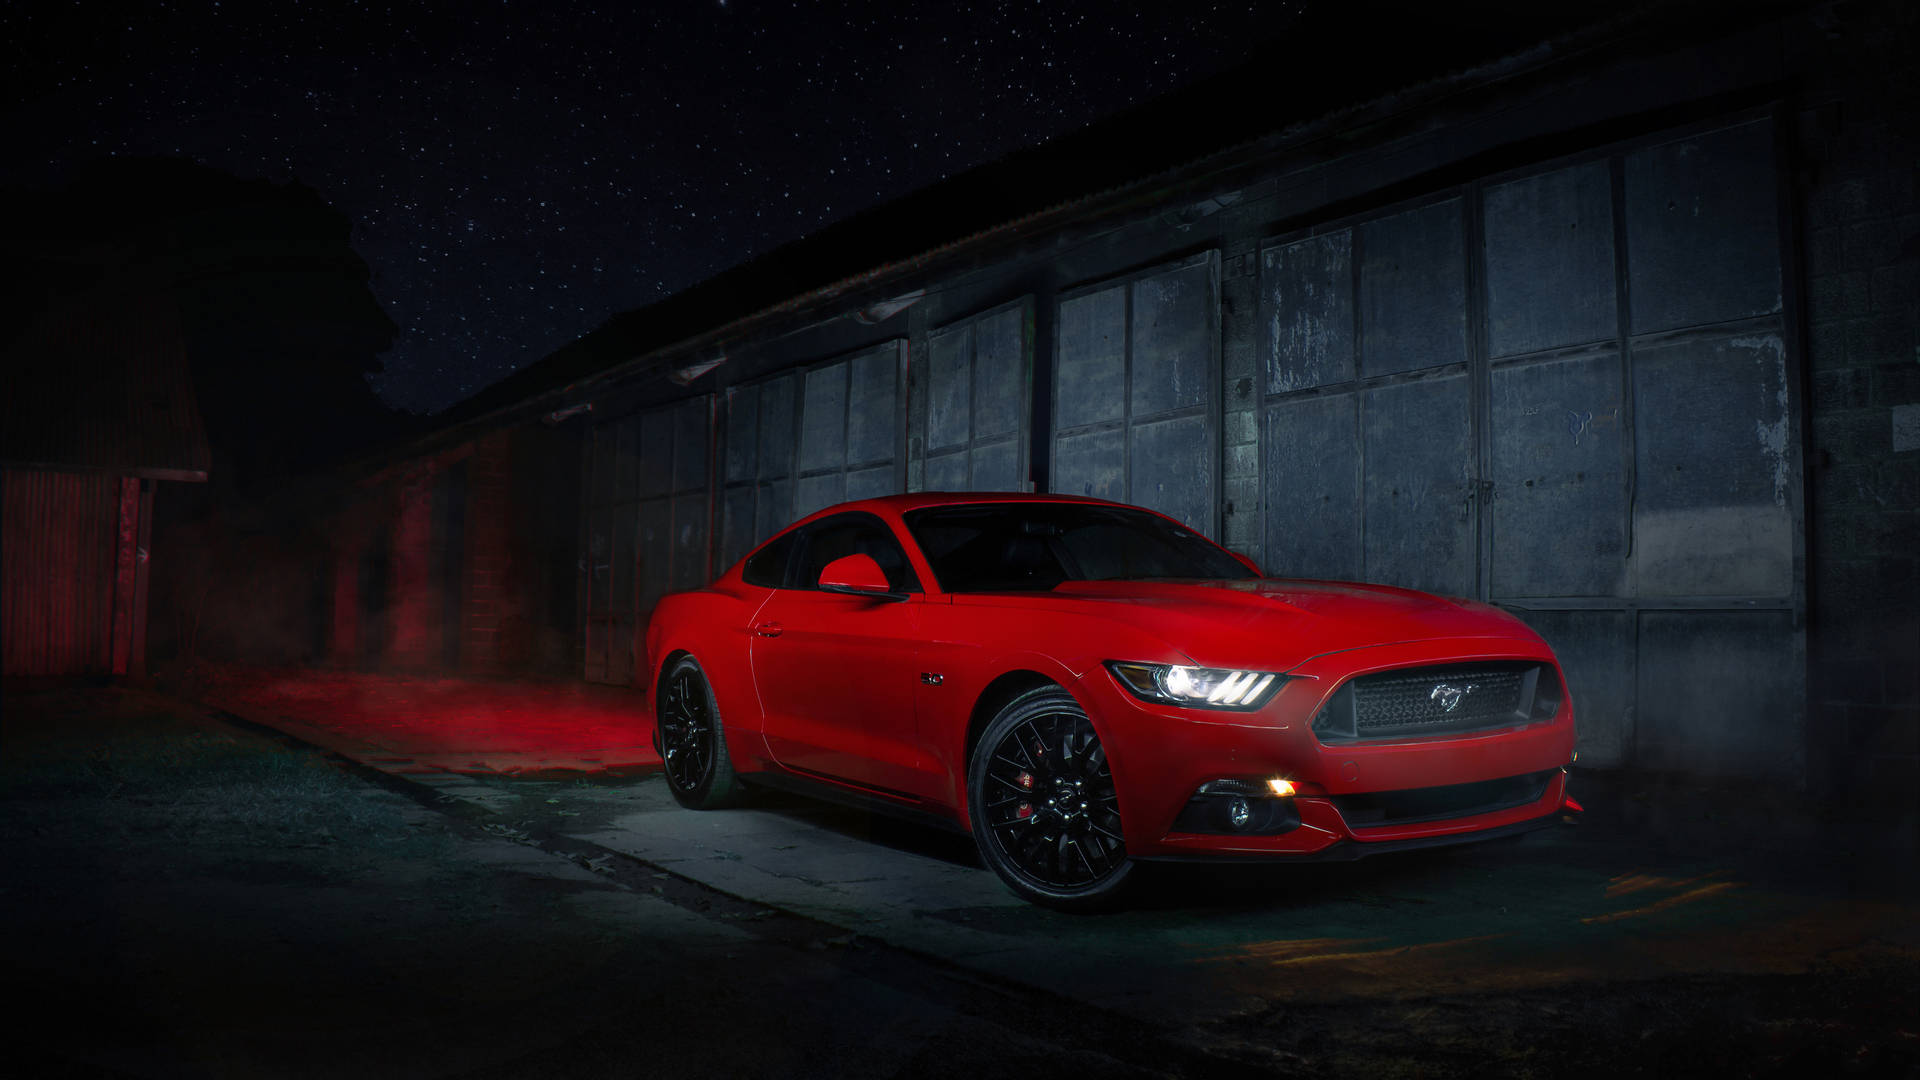 Unleash the Power and Style of This Cool Mustang Wallpaper